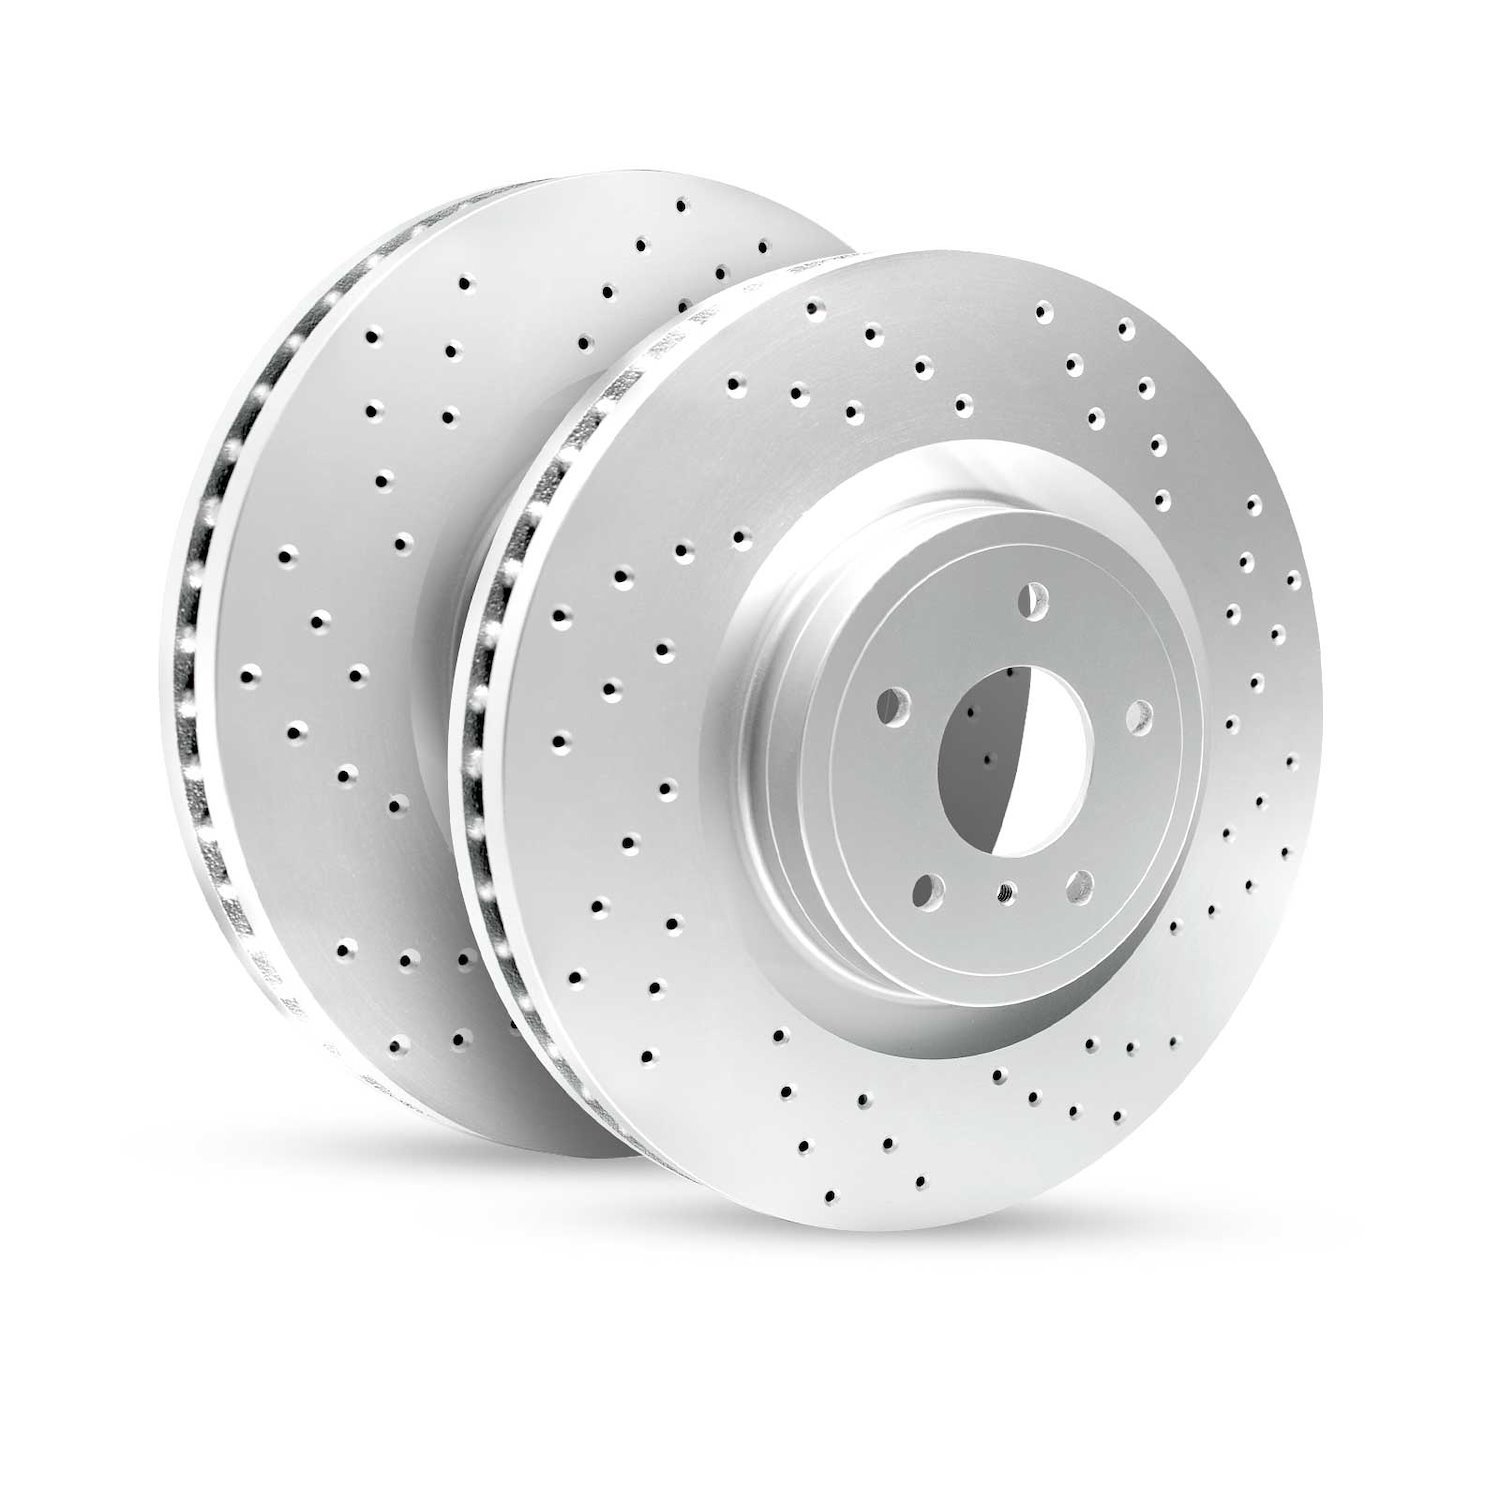 GEO-Carbon Drilled/Slotted Rotors, Fits Select Tesla, Position: